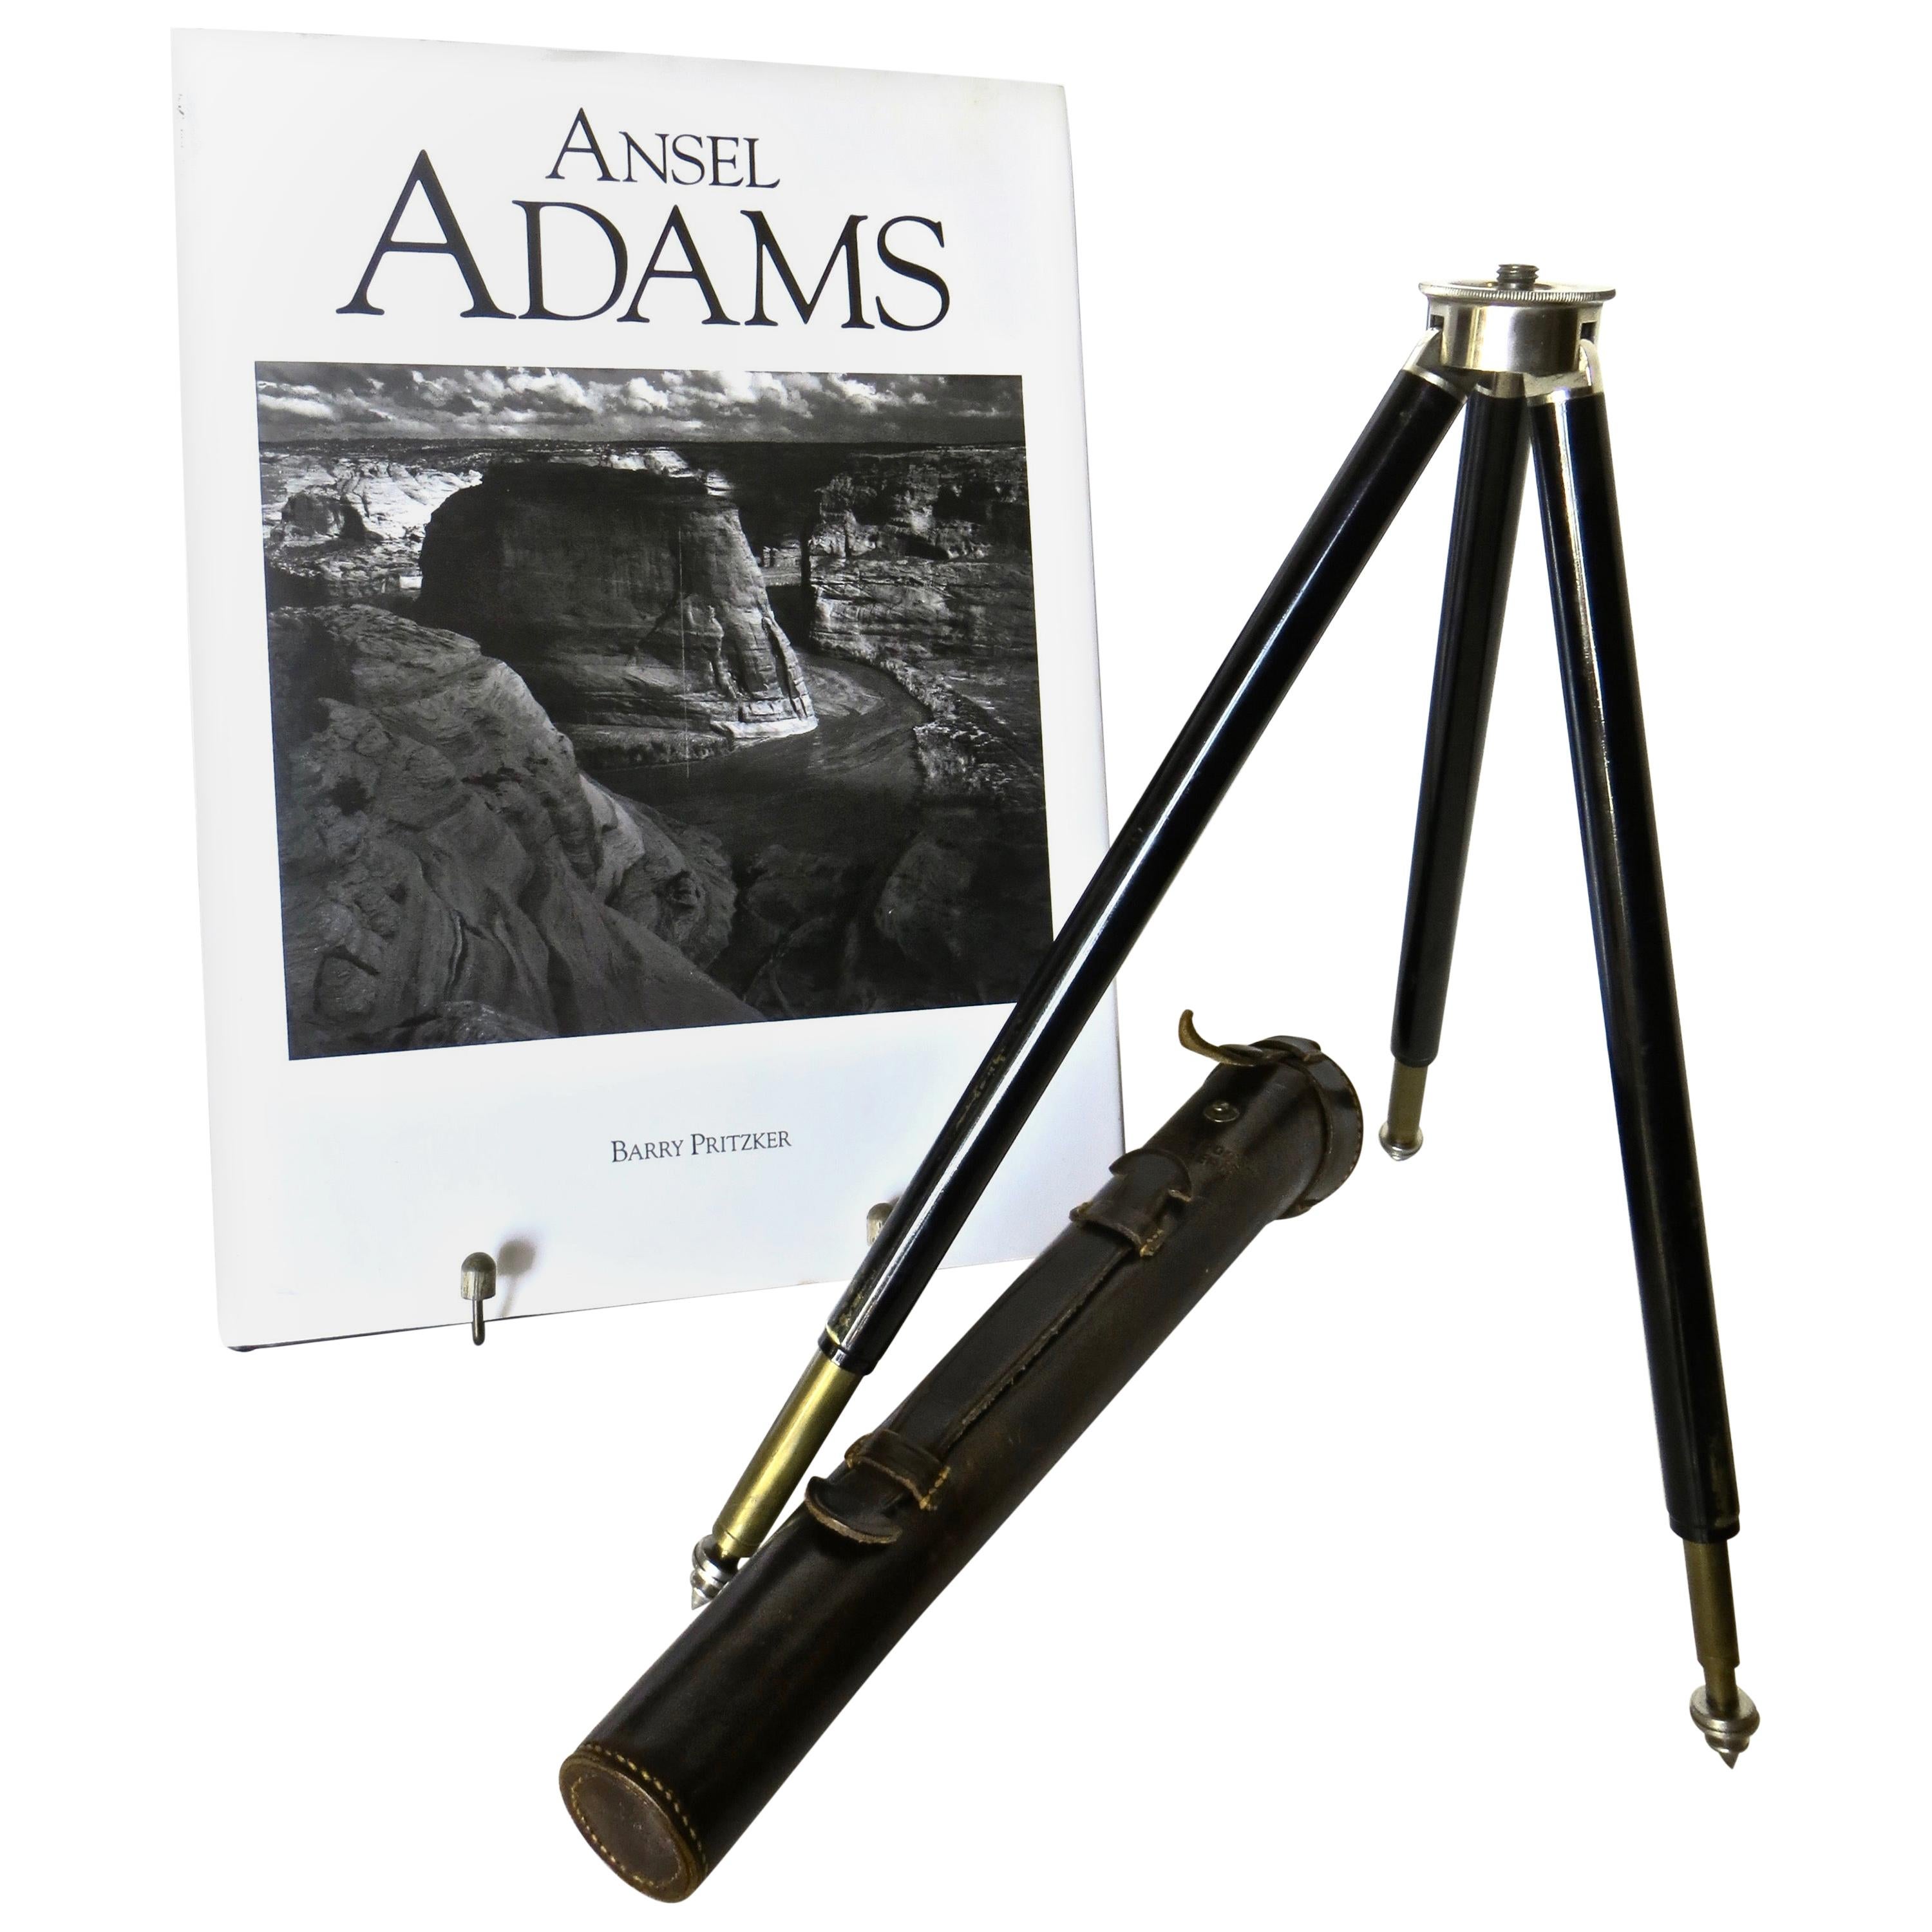 Vintage Miniature German Variable Camera Tripod 1920s with Ansel Adams Book